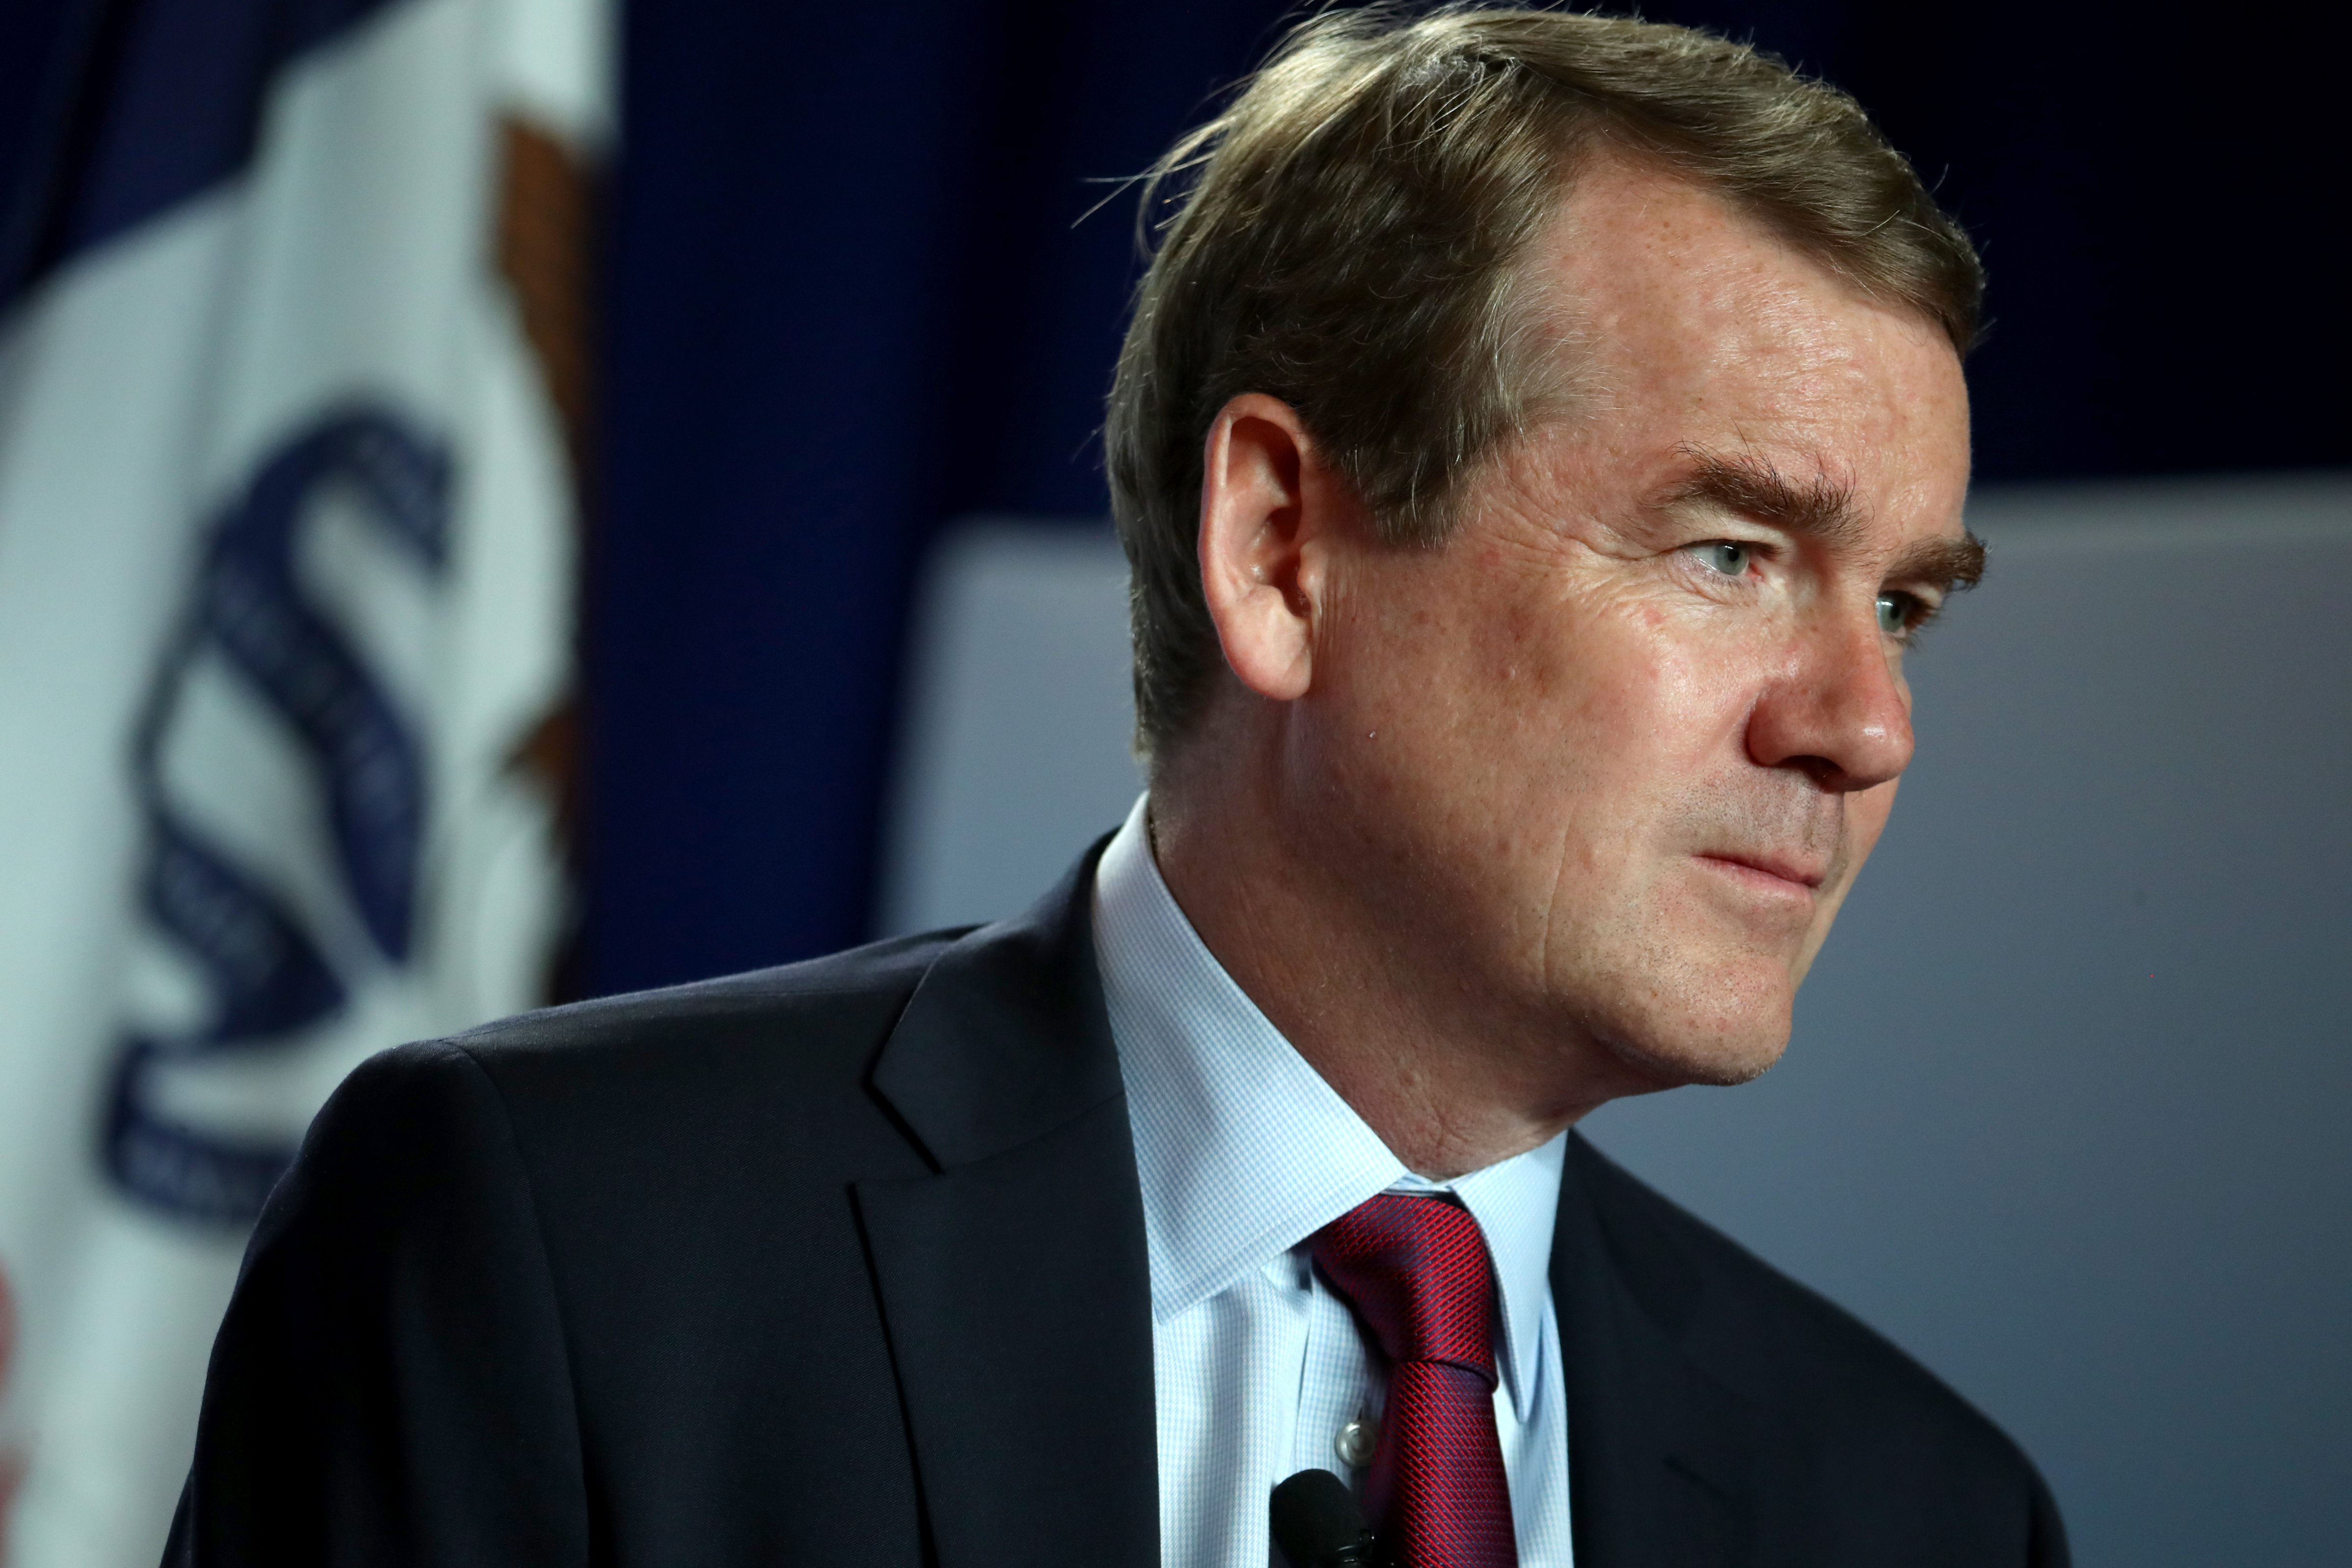 Democratic presidential candidate U.S. Sen. Michael Bennet (D-CO) speaks during the AARP and The Des Moines Register Iowa Presidential Candidate Forum on July 17, 2019 in Cedar Rapids, Iowa. (Justin Sullivan—Getty Images)